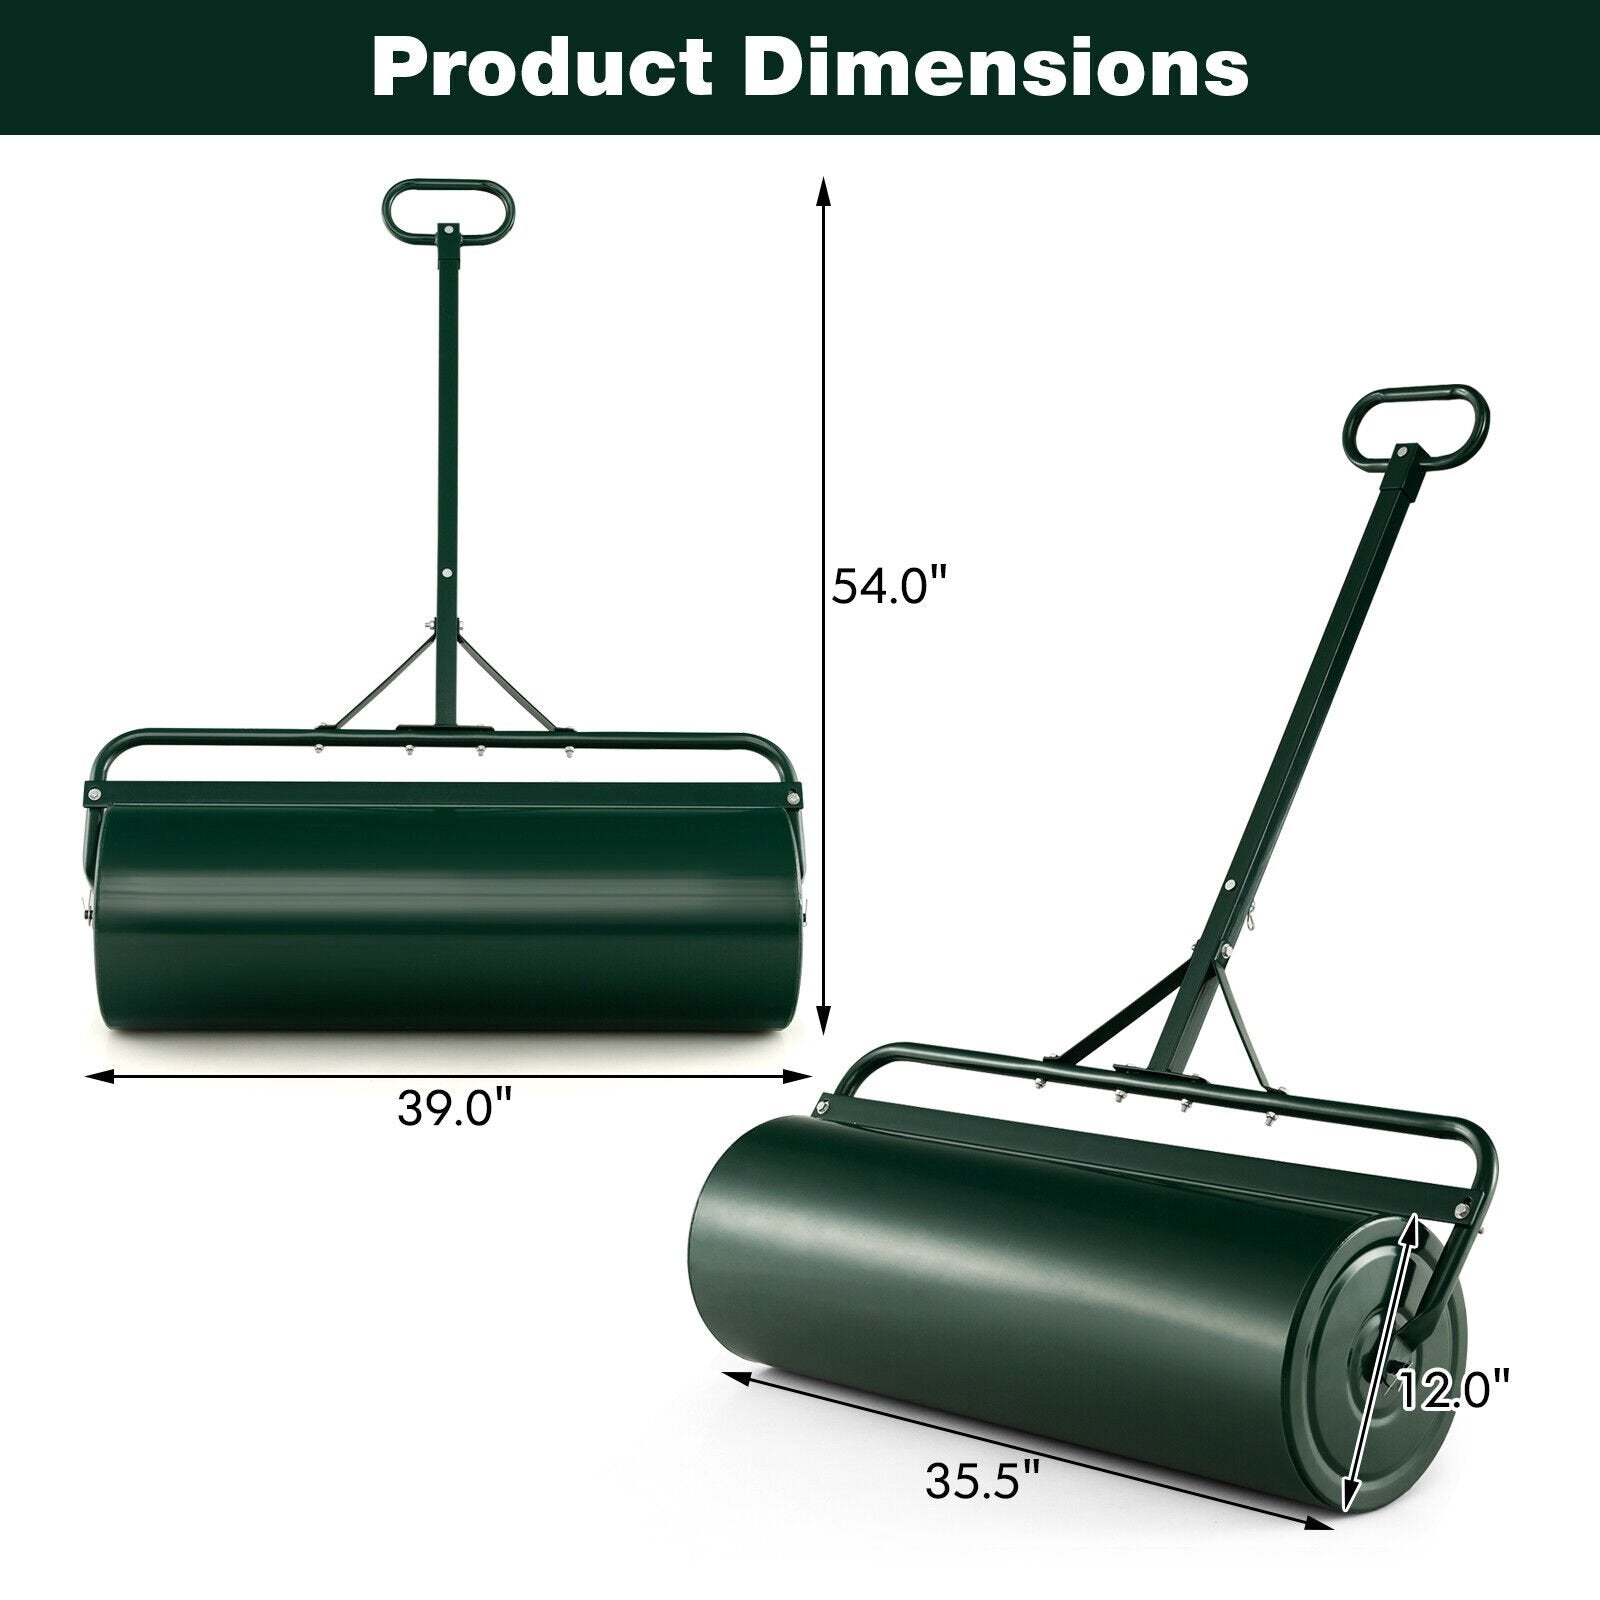 Metal Lawn Roller with Detachable Gripping Handle, Green at Gallery Canada